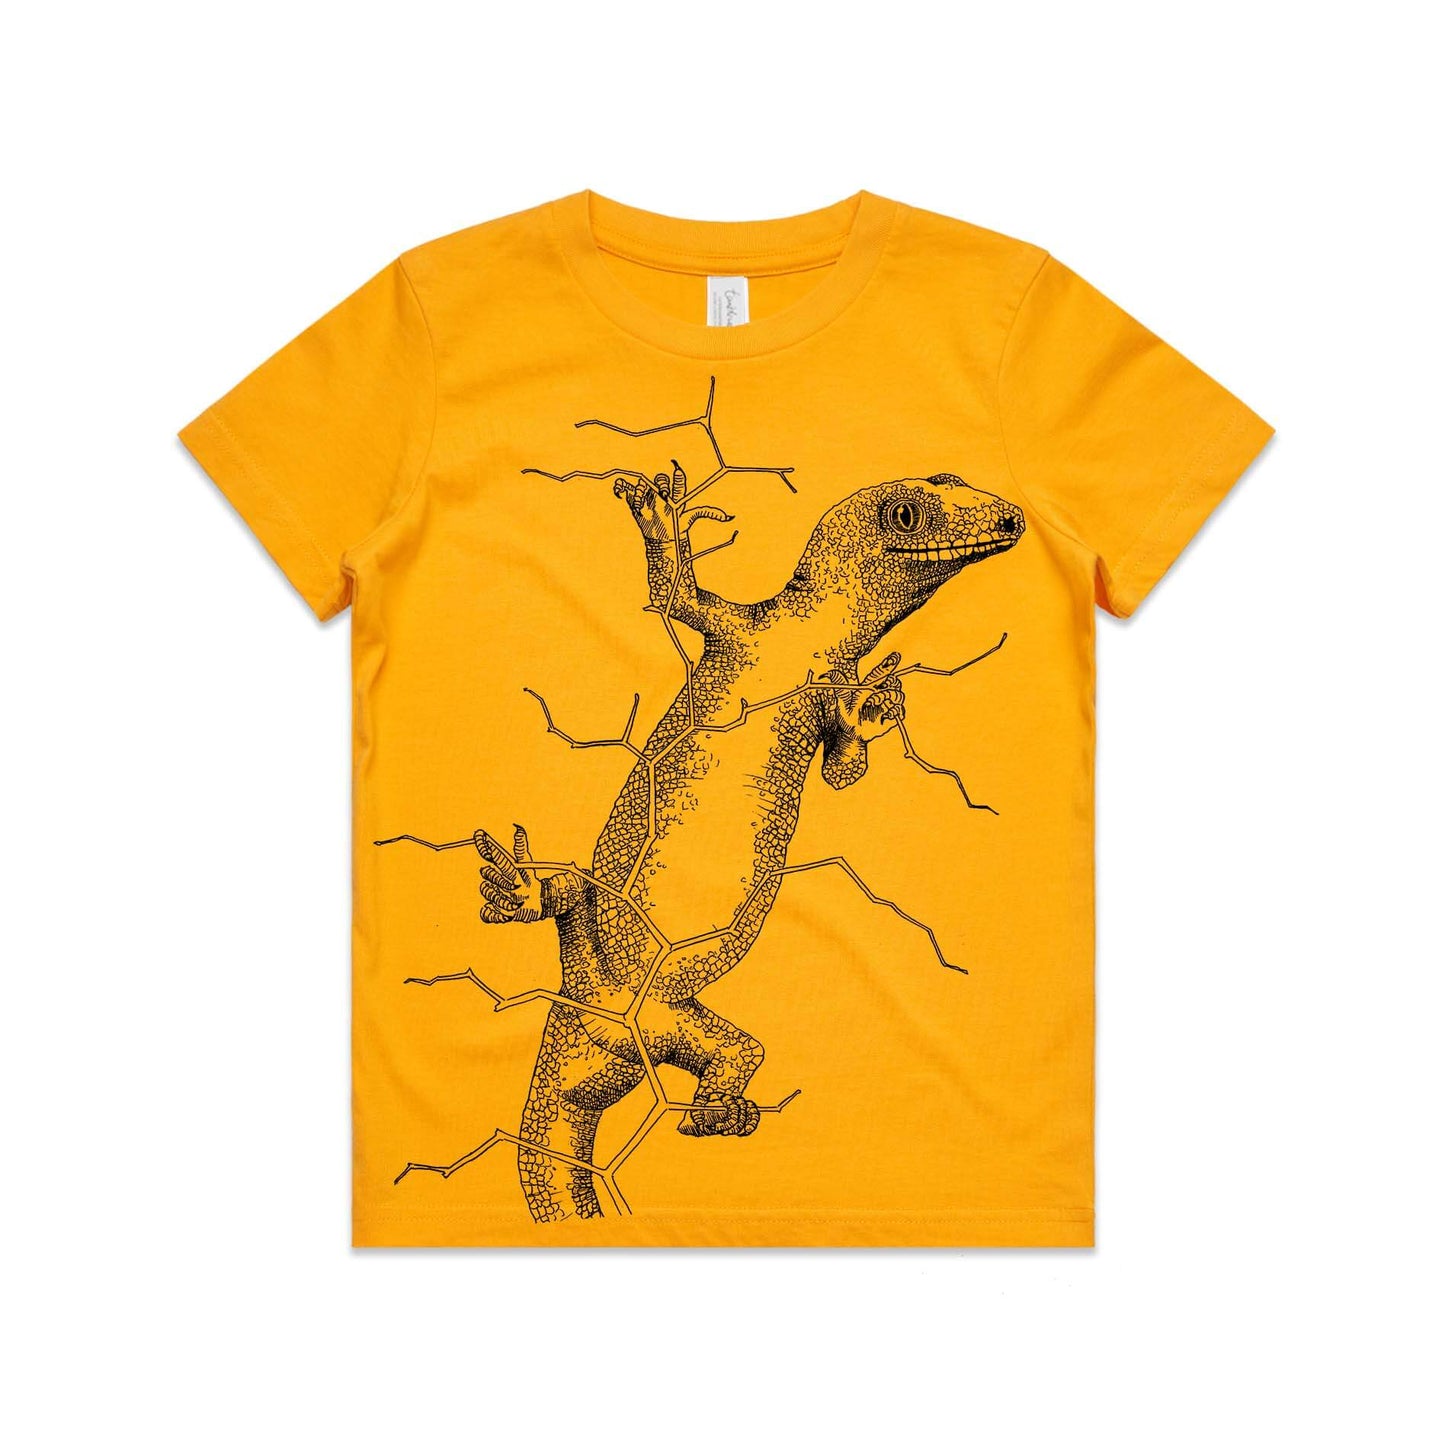 Gold, cotton kids' t-shirt with screen printed gecko design.